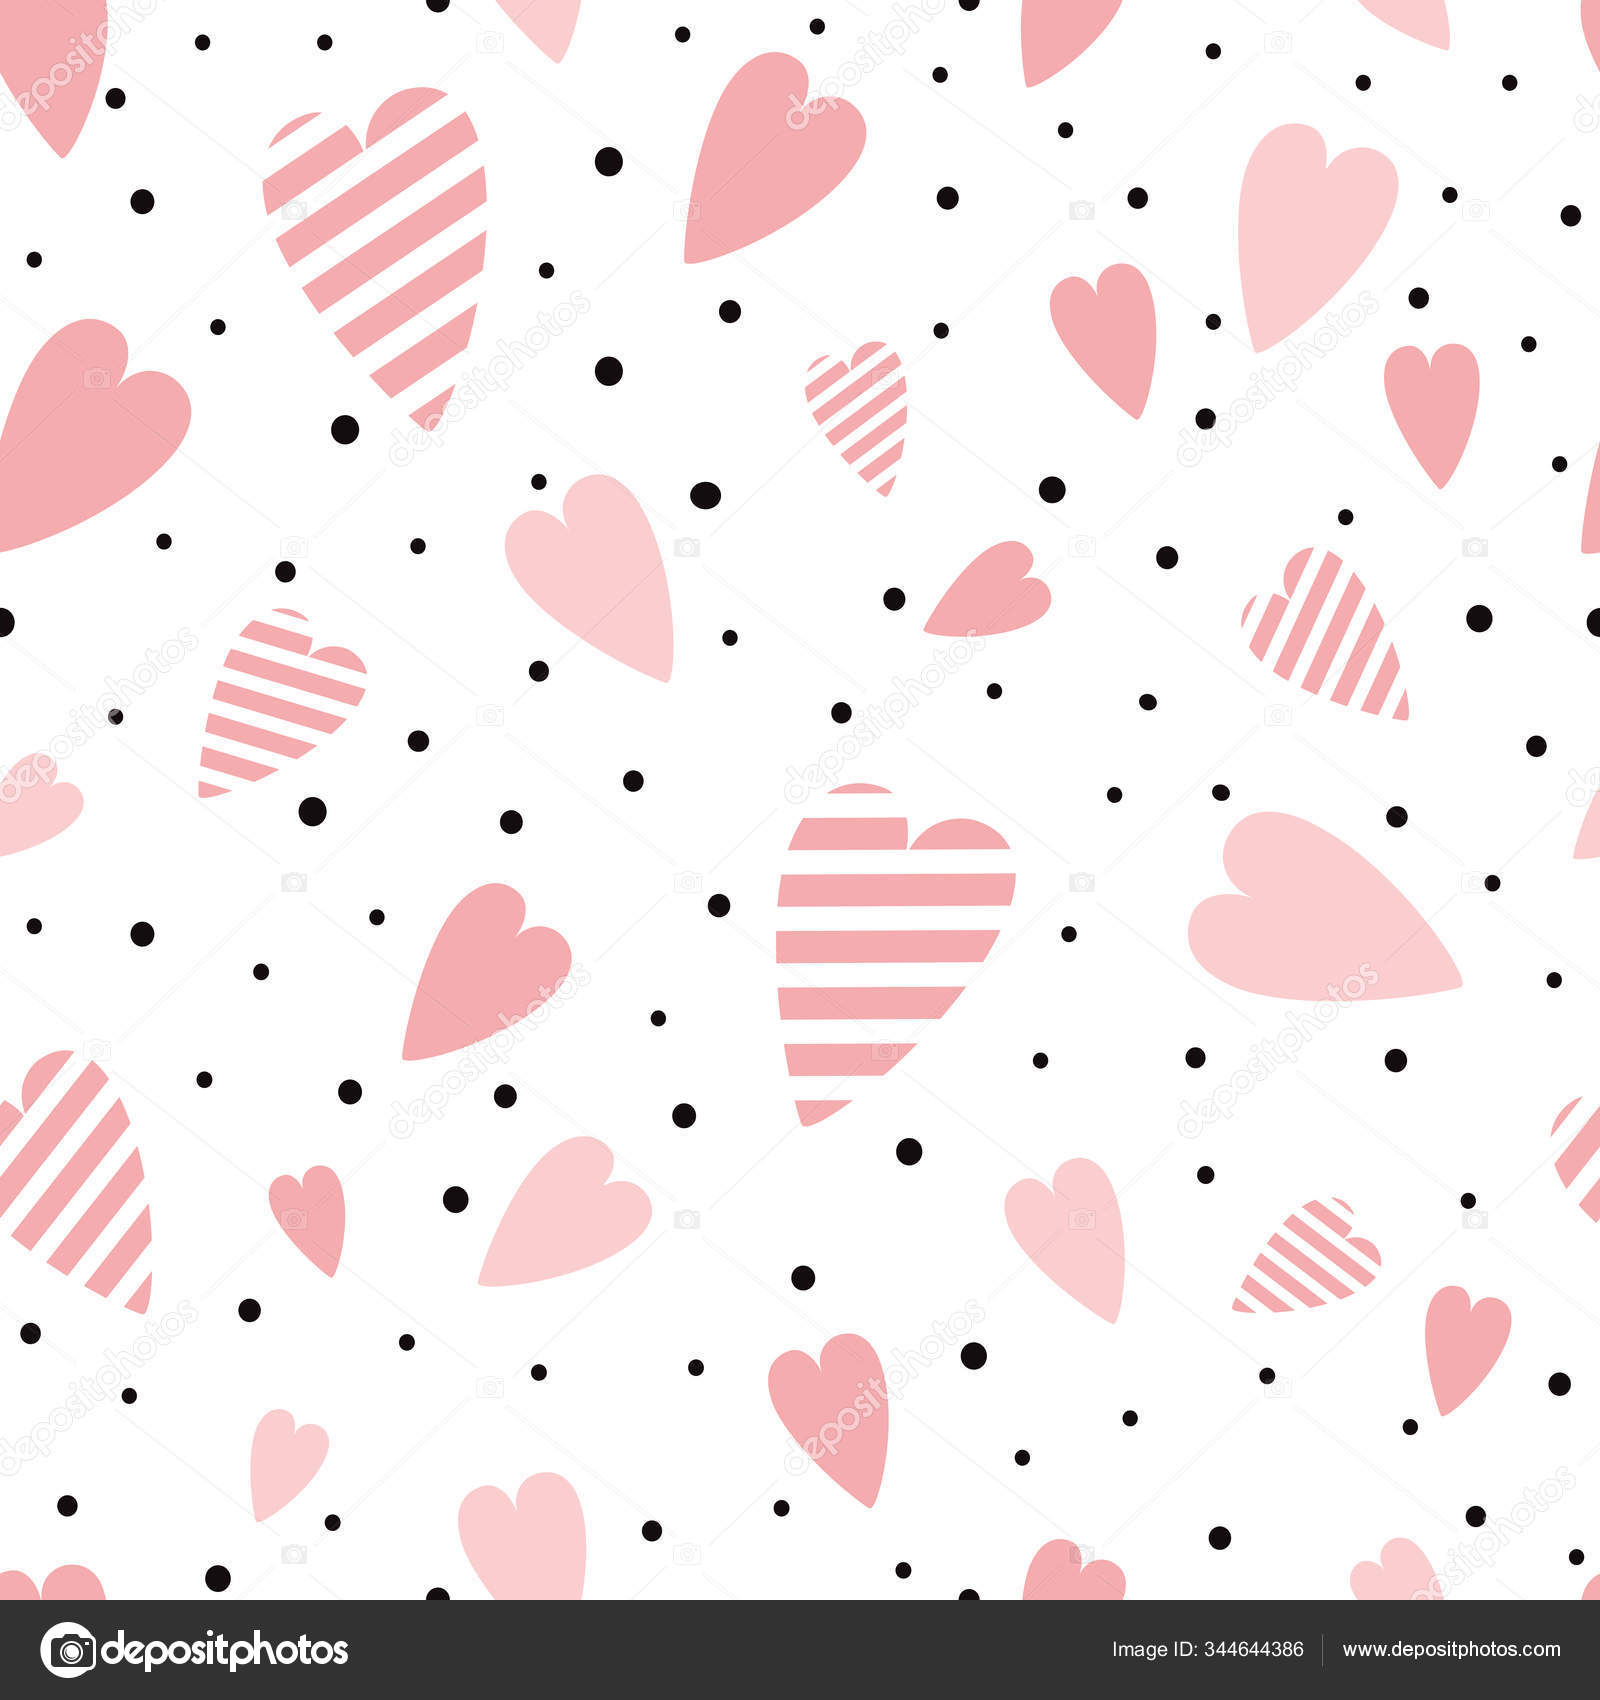 Multiple Designs Valentine's Day Wrapping Paper, Gift Wrap, Polka Dots,  Hearts, Black Heart Sketch, Minimalist, V-day, Love 